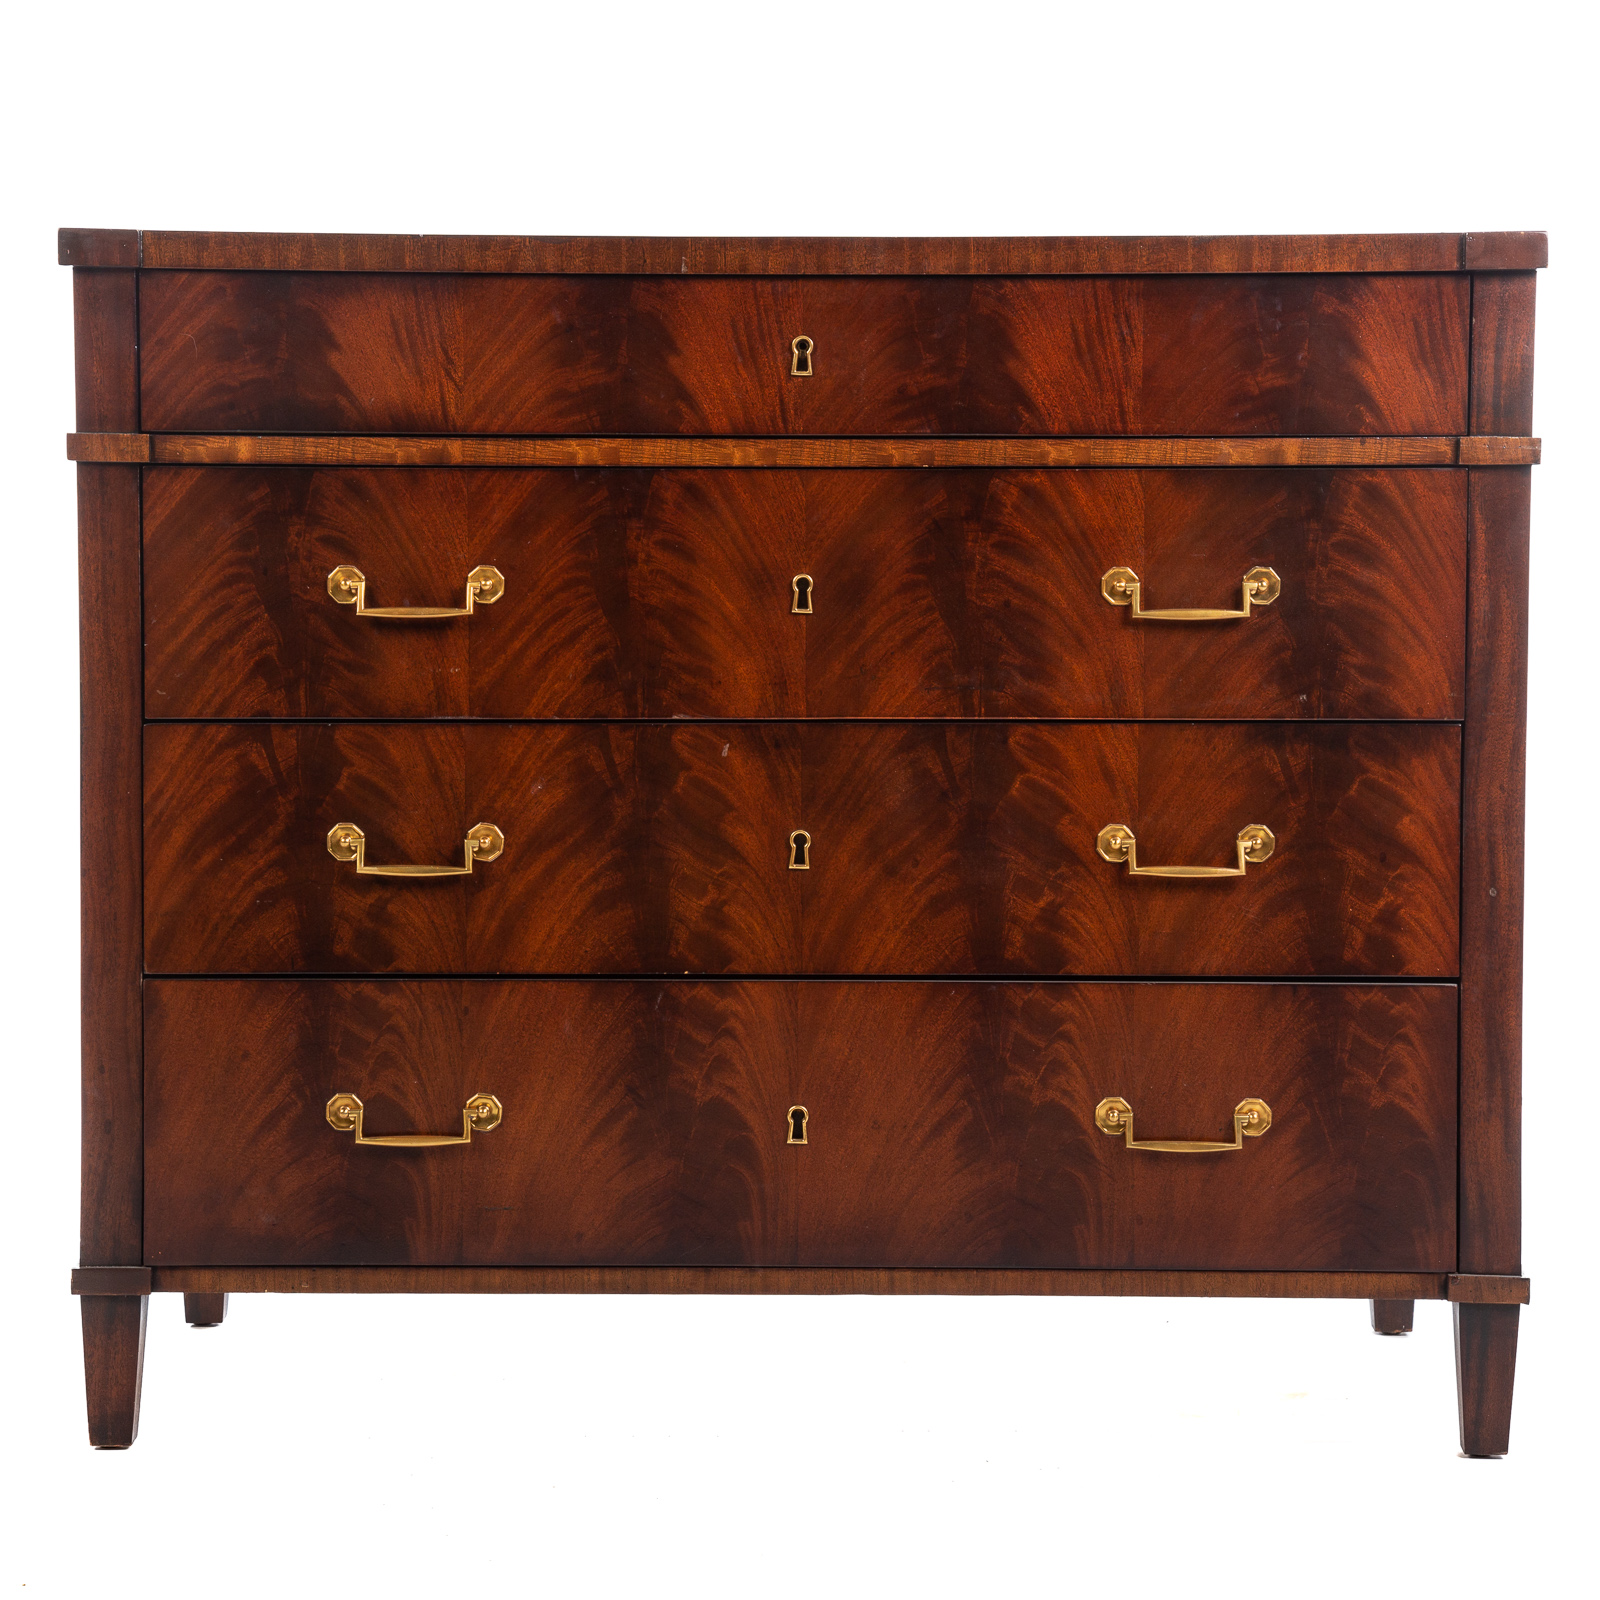 HICKORY CHAIR BANDED MAHOGANY CHEST 28760d